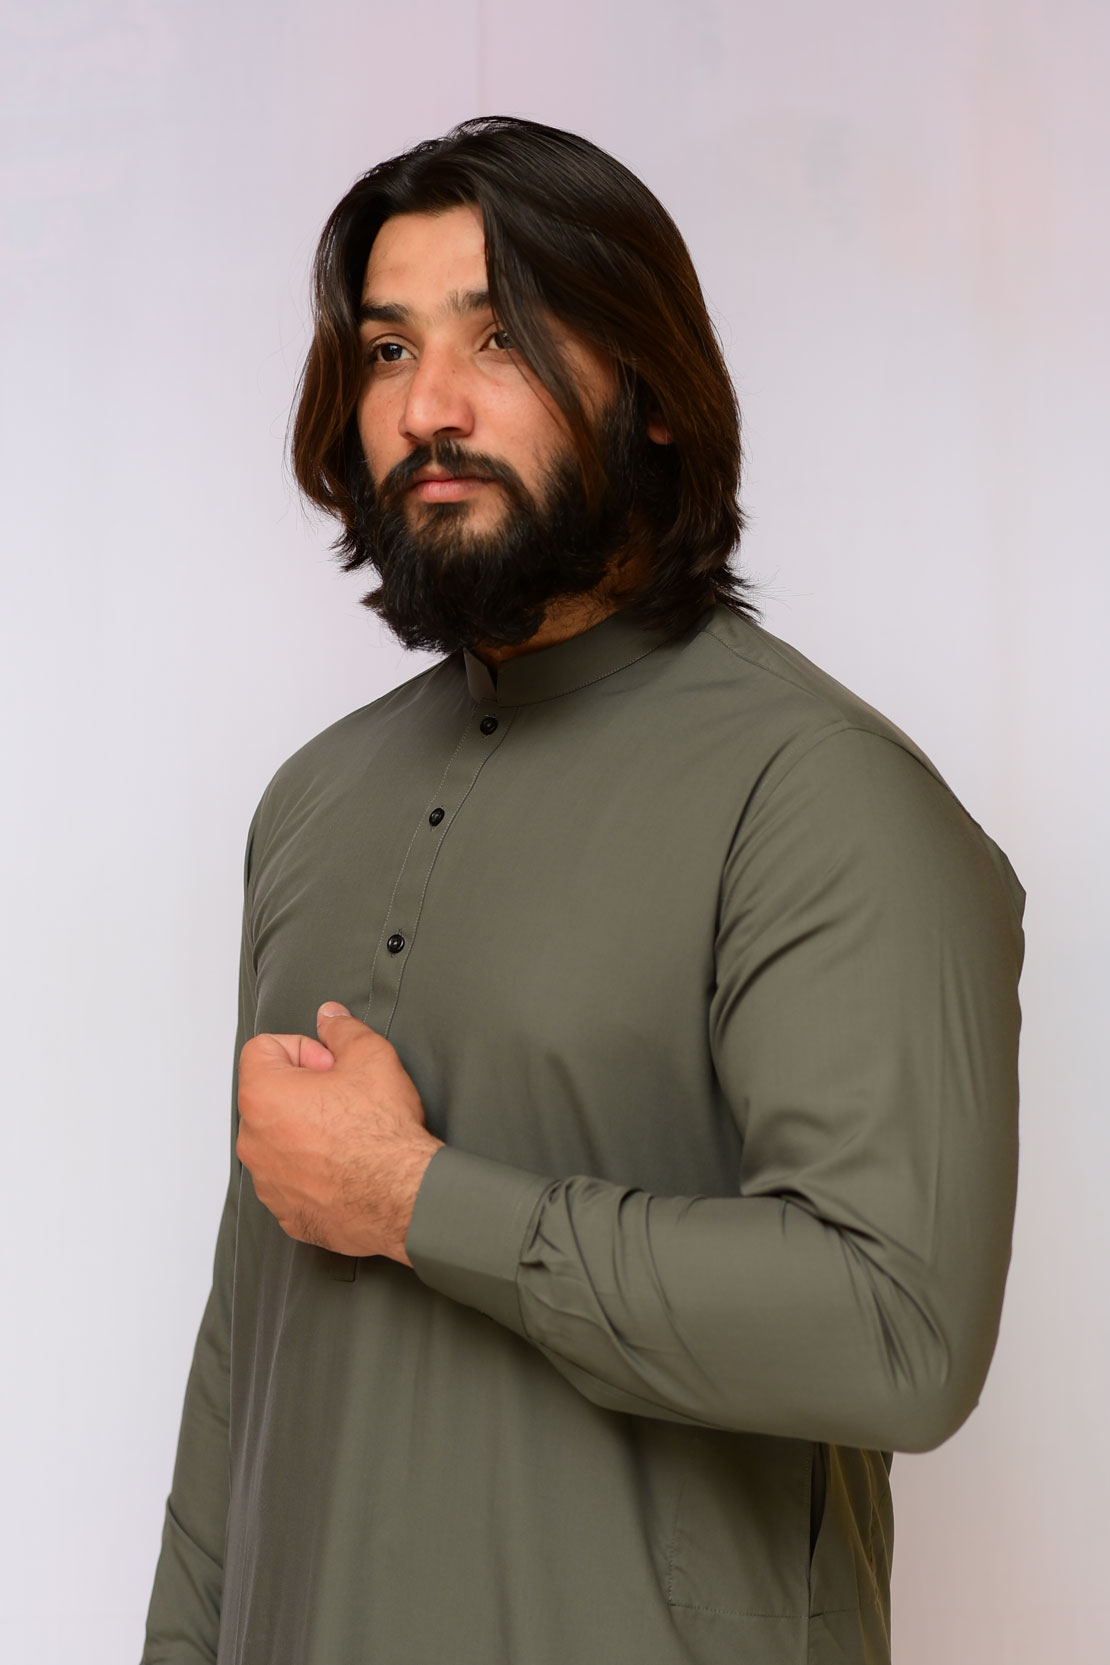 Indicot Men's Stitched Collection - Casual Cotton shalwar kameez